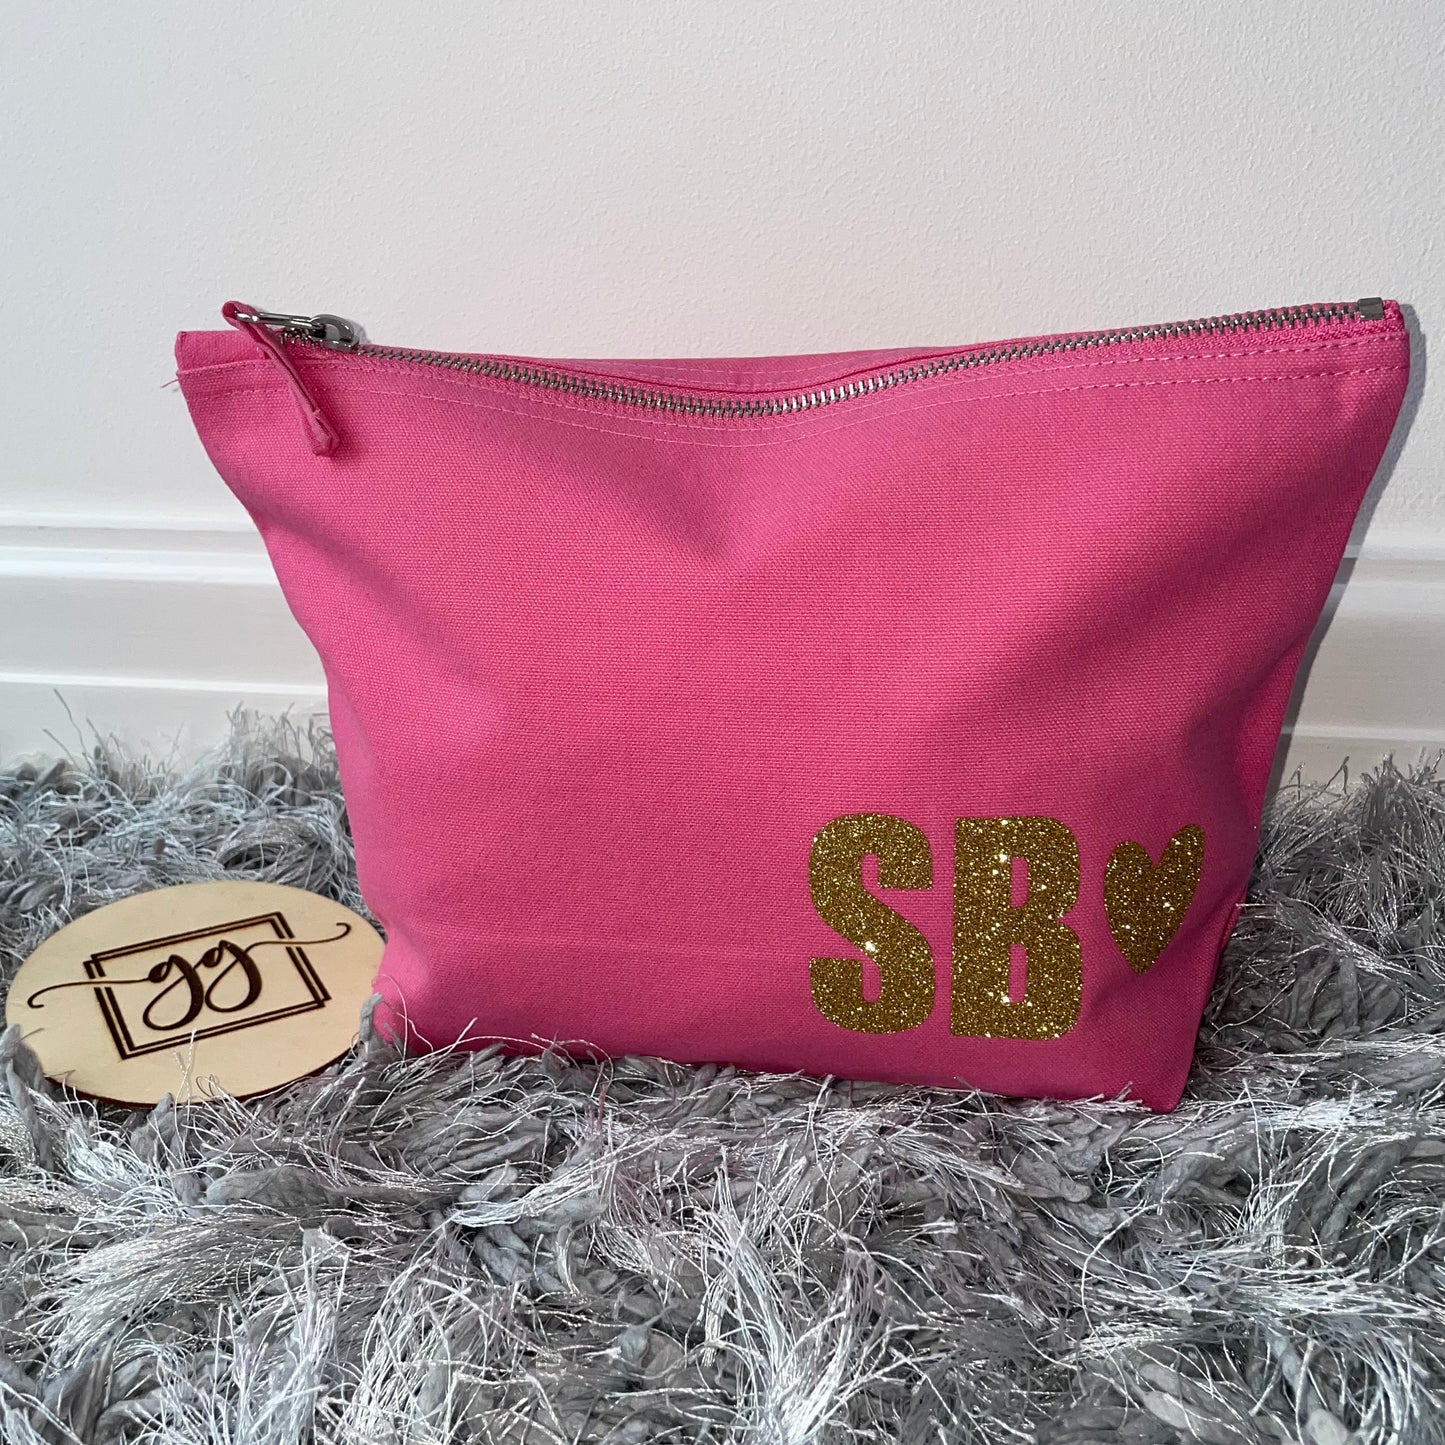 Initials Large Accessory Pouch